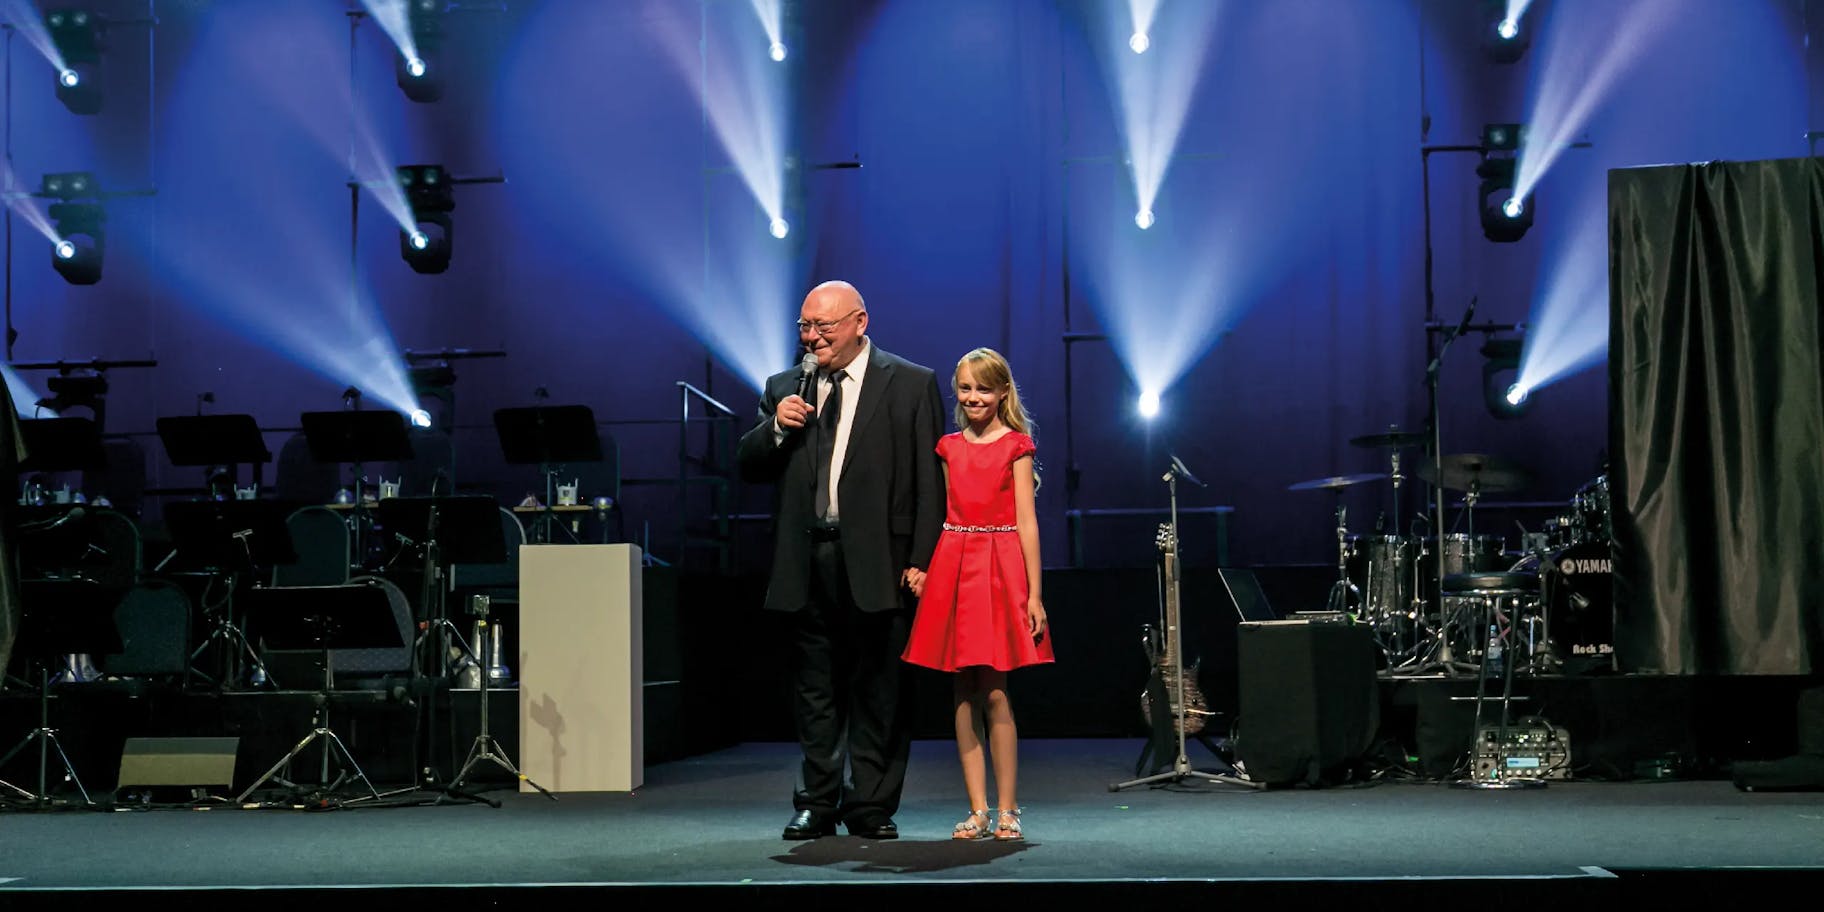 Gerhard Schubert is giving a speech on stage at a corporate event, with a girl in a red dress standing next to him.